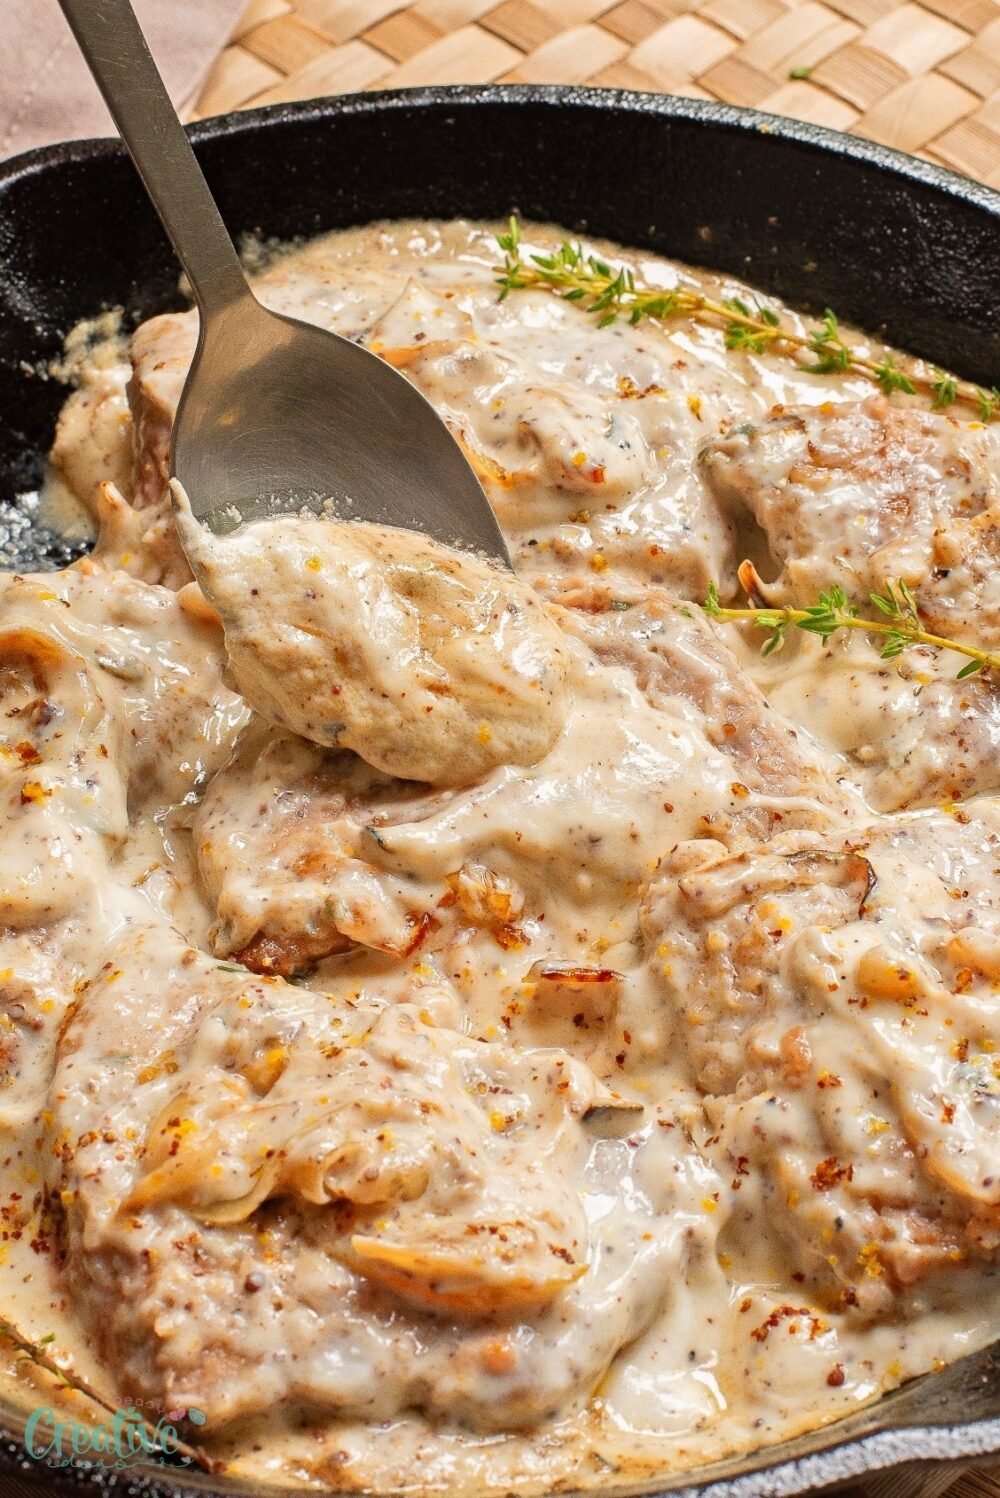 Succulent pork loin bathed in delectable mustard sauce - a mouthwatering dish ready in just 30 minutes!